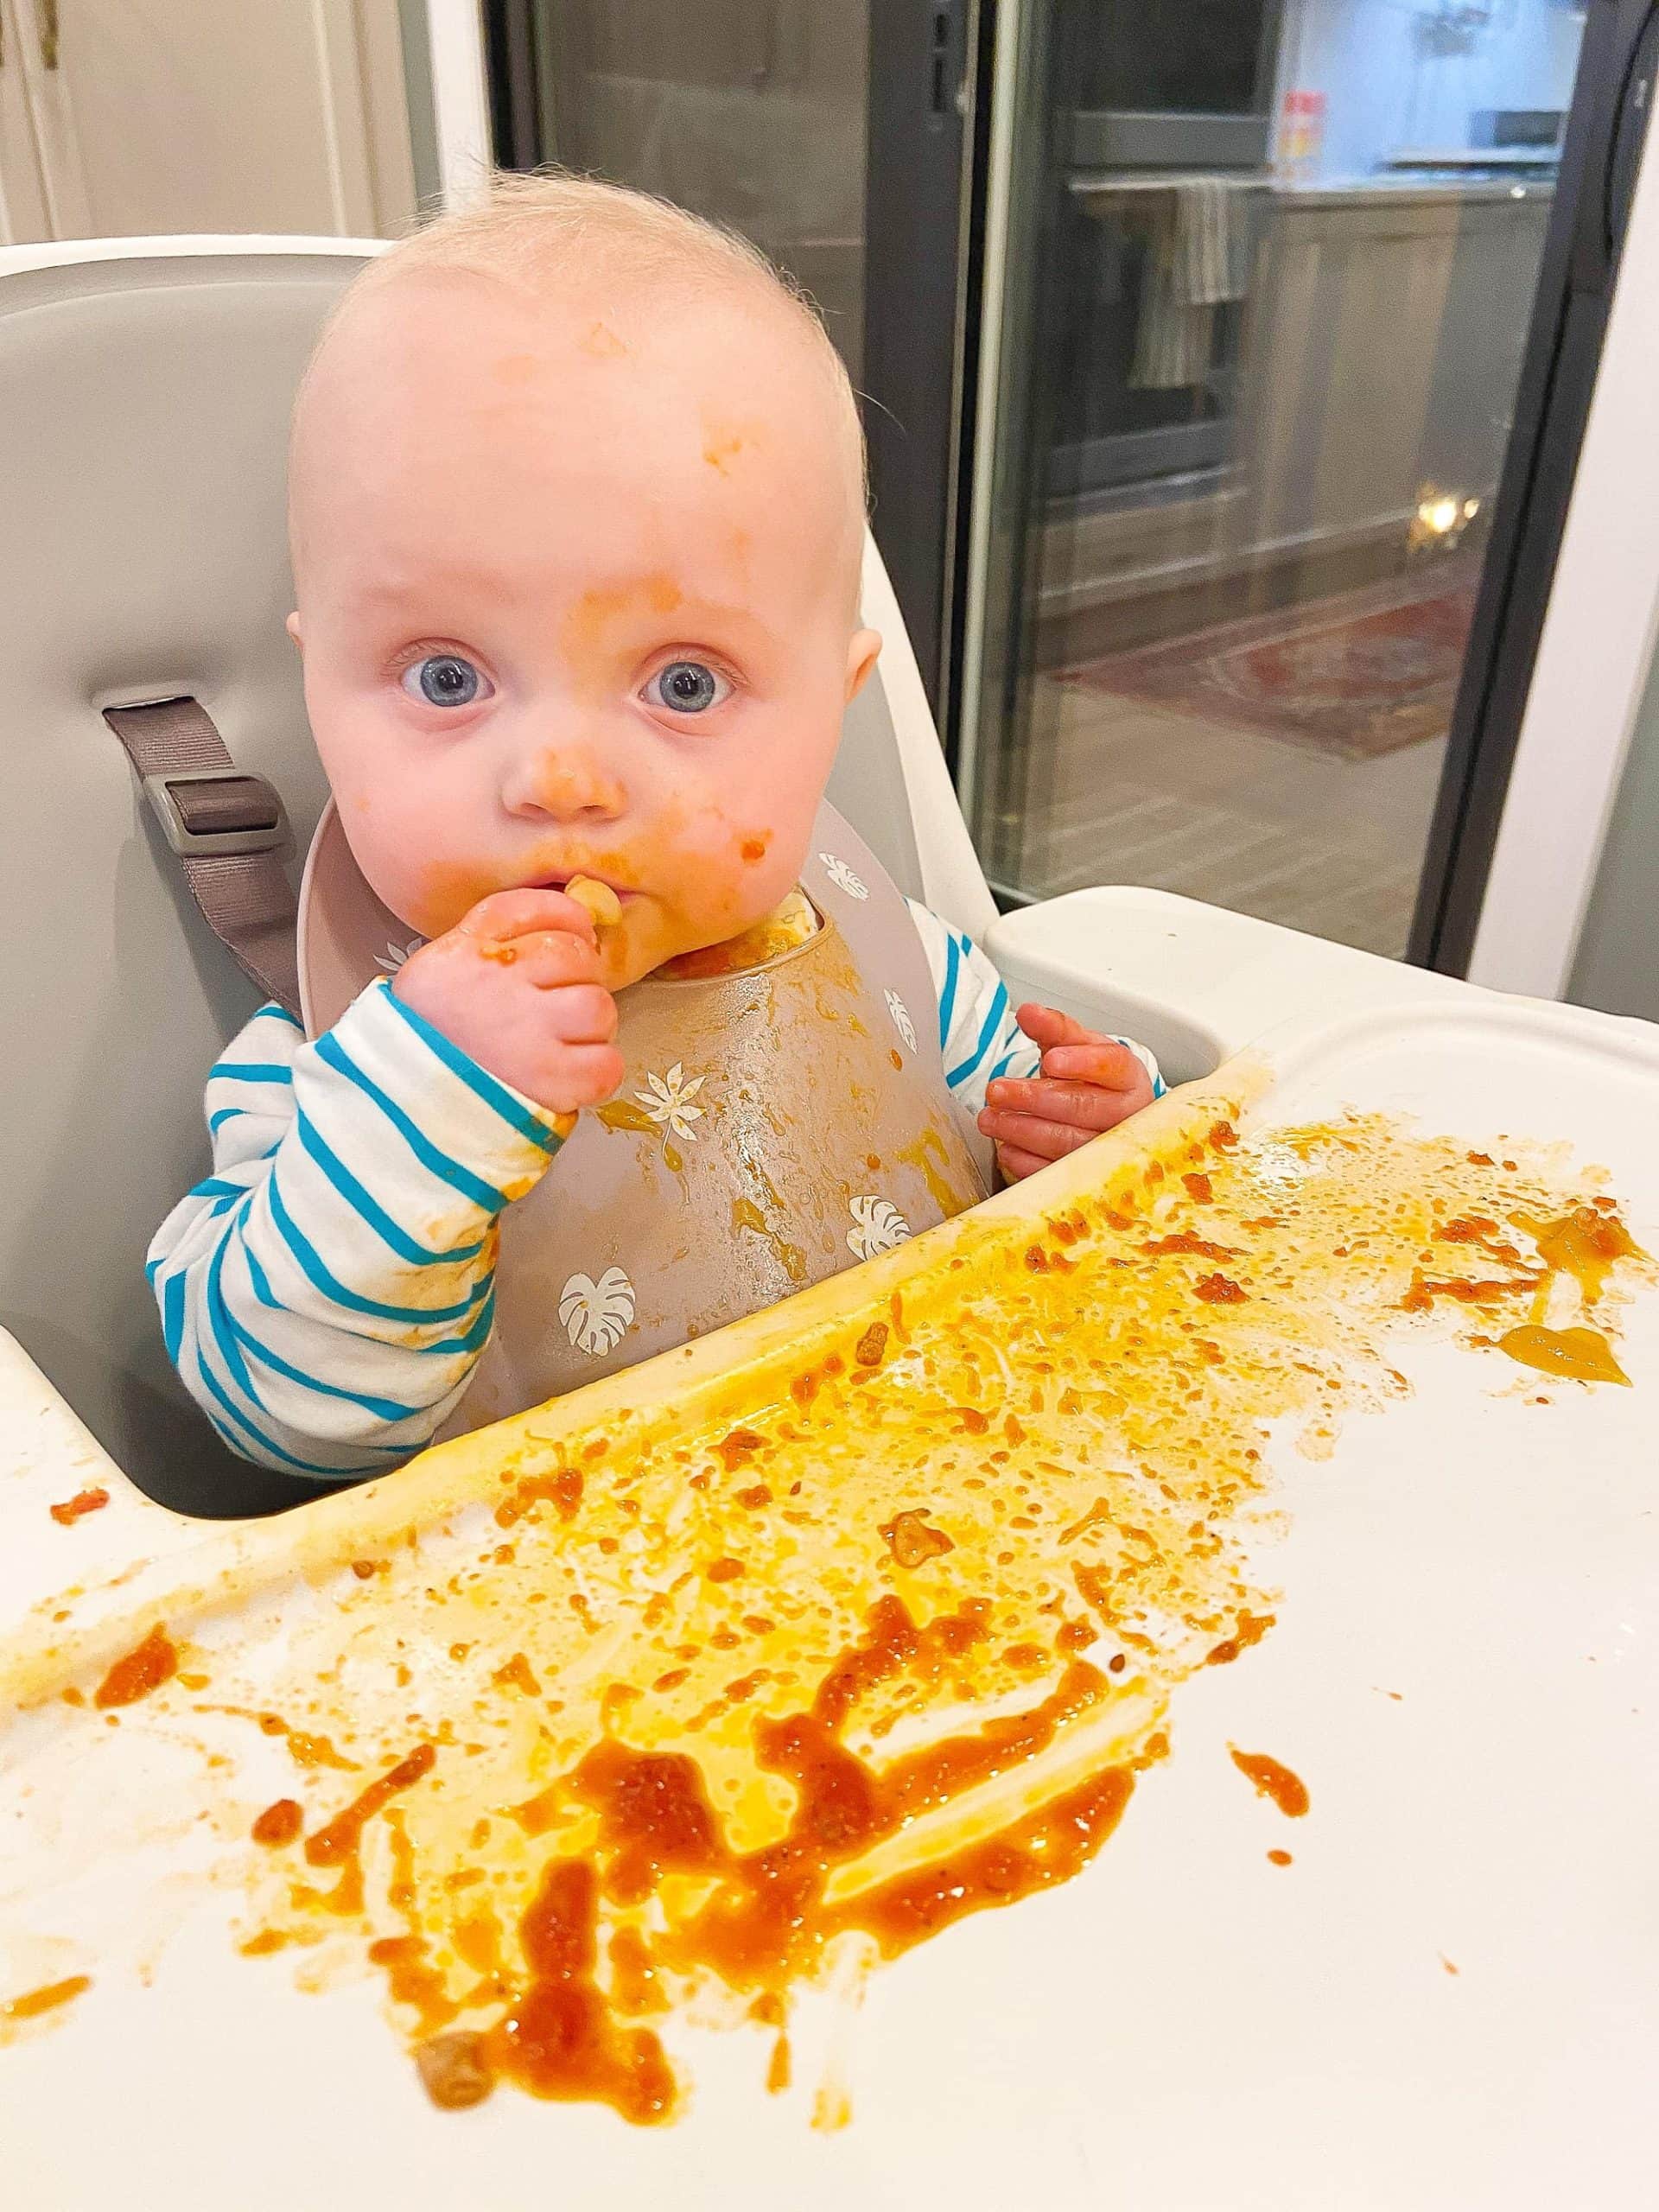 Eating pasta and meatballs from baby led weaning